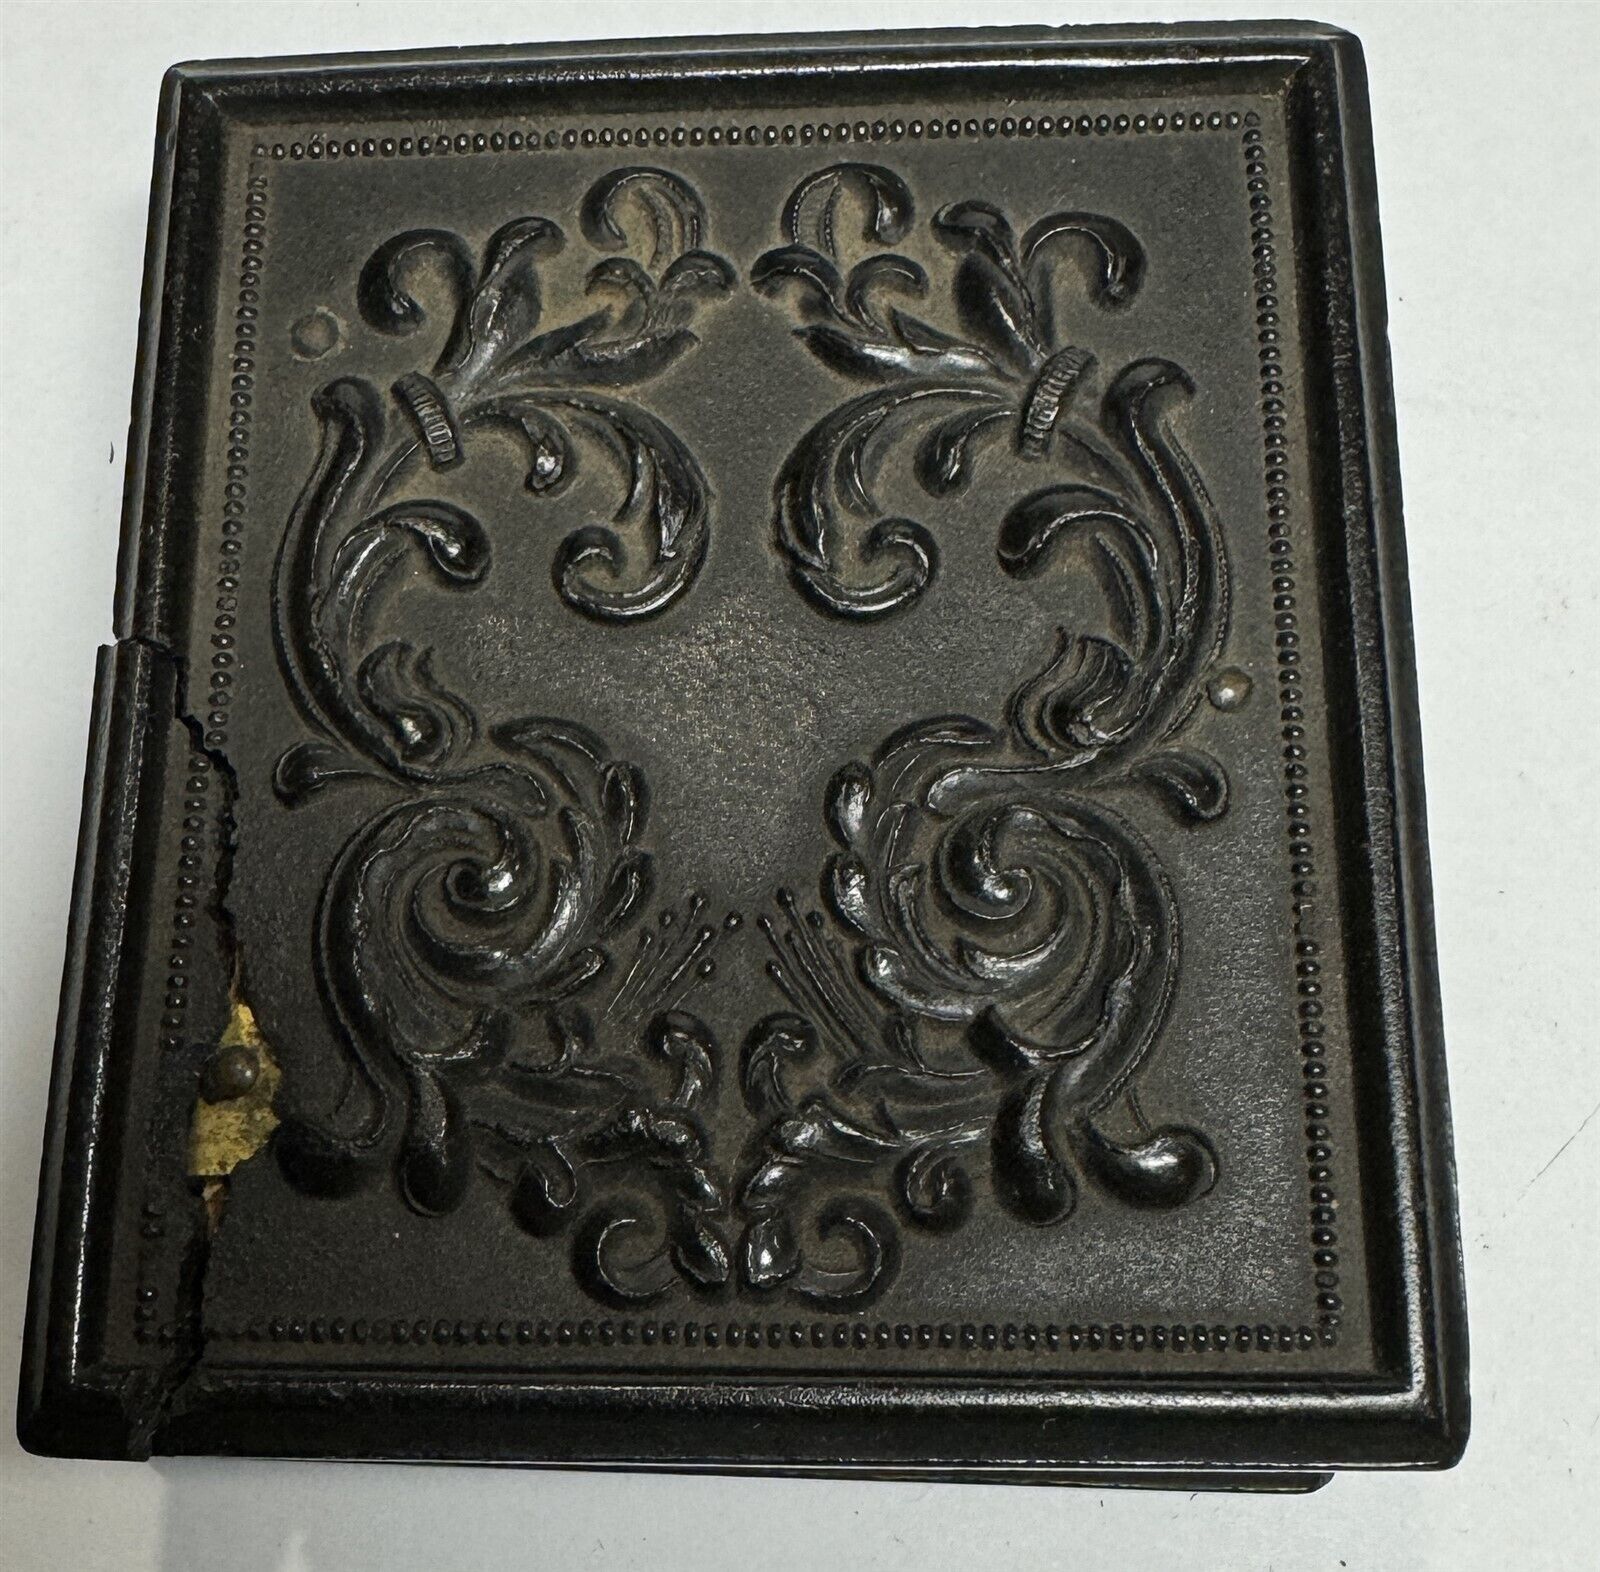 Antique Geometric 9th Plate Union Case for Photographs - In Need Of Restoration